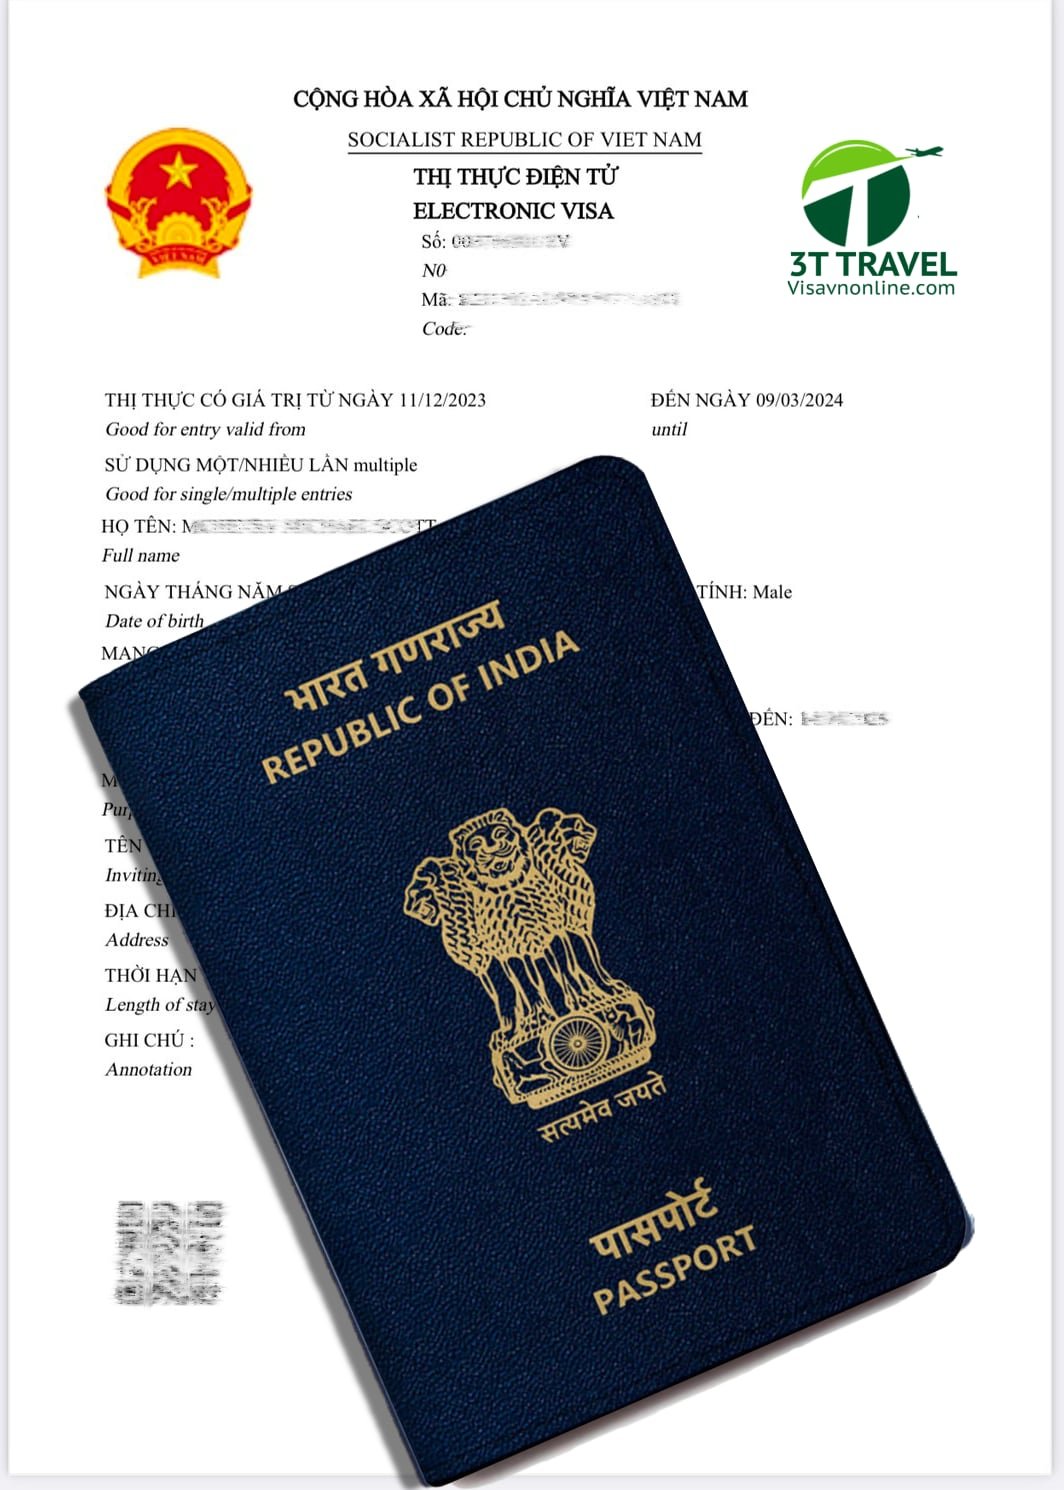 How to Apply for VietNam Visa from India